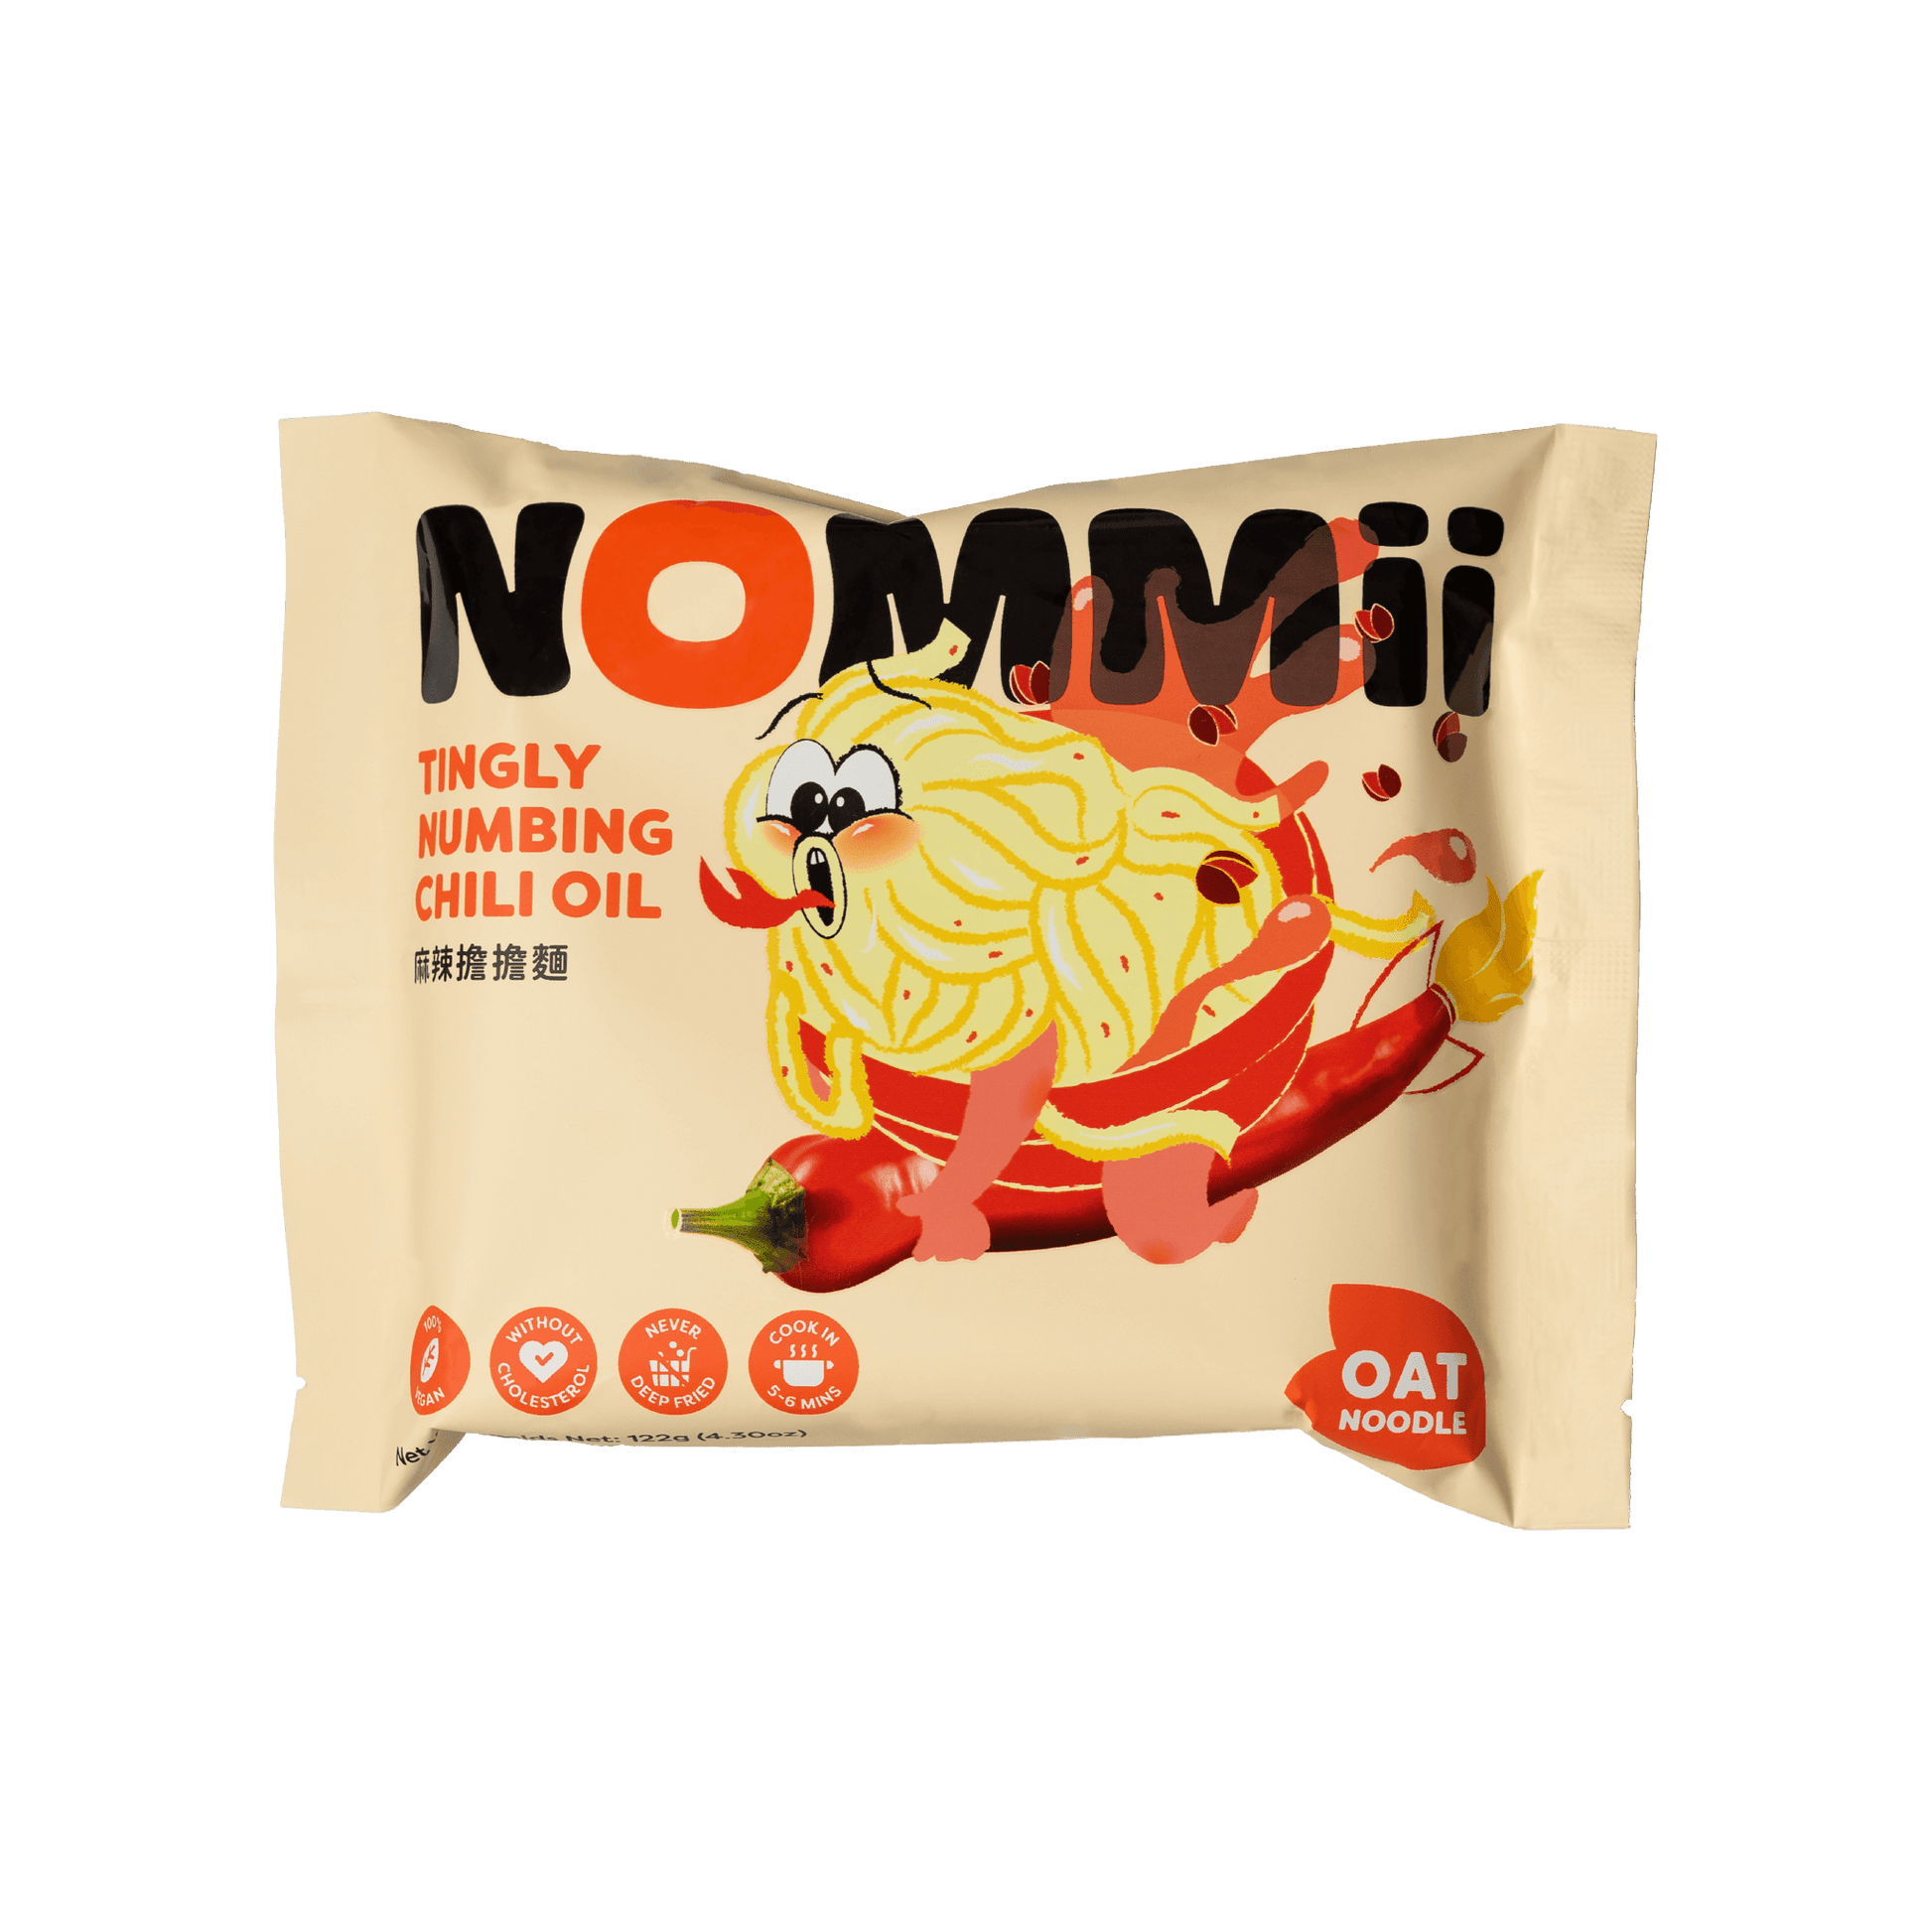 Tingly Numbing Chili Oil Oat Noodles (8-Pack) - NOMMii